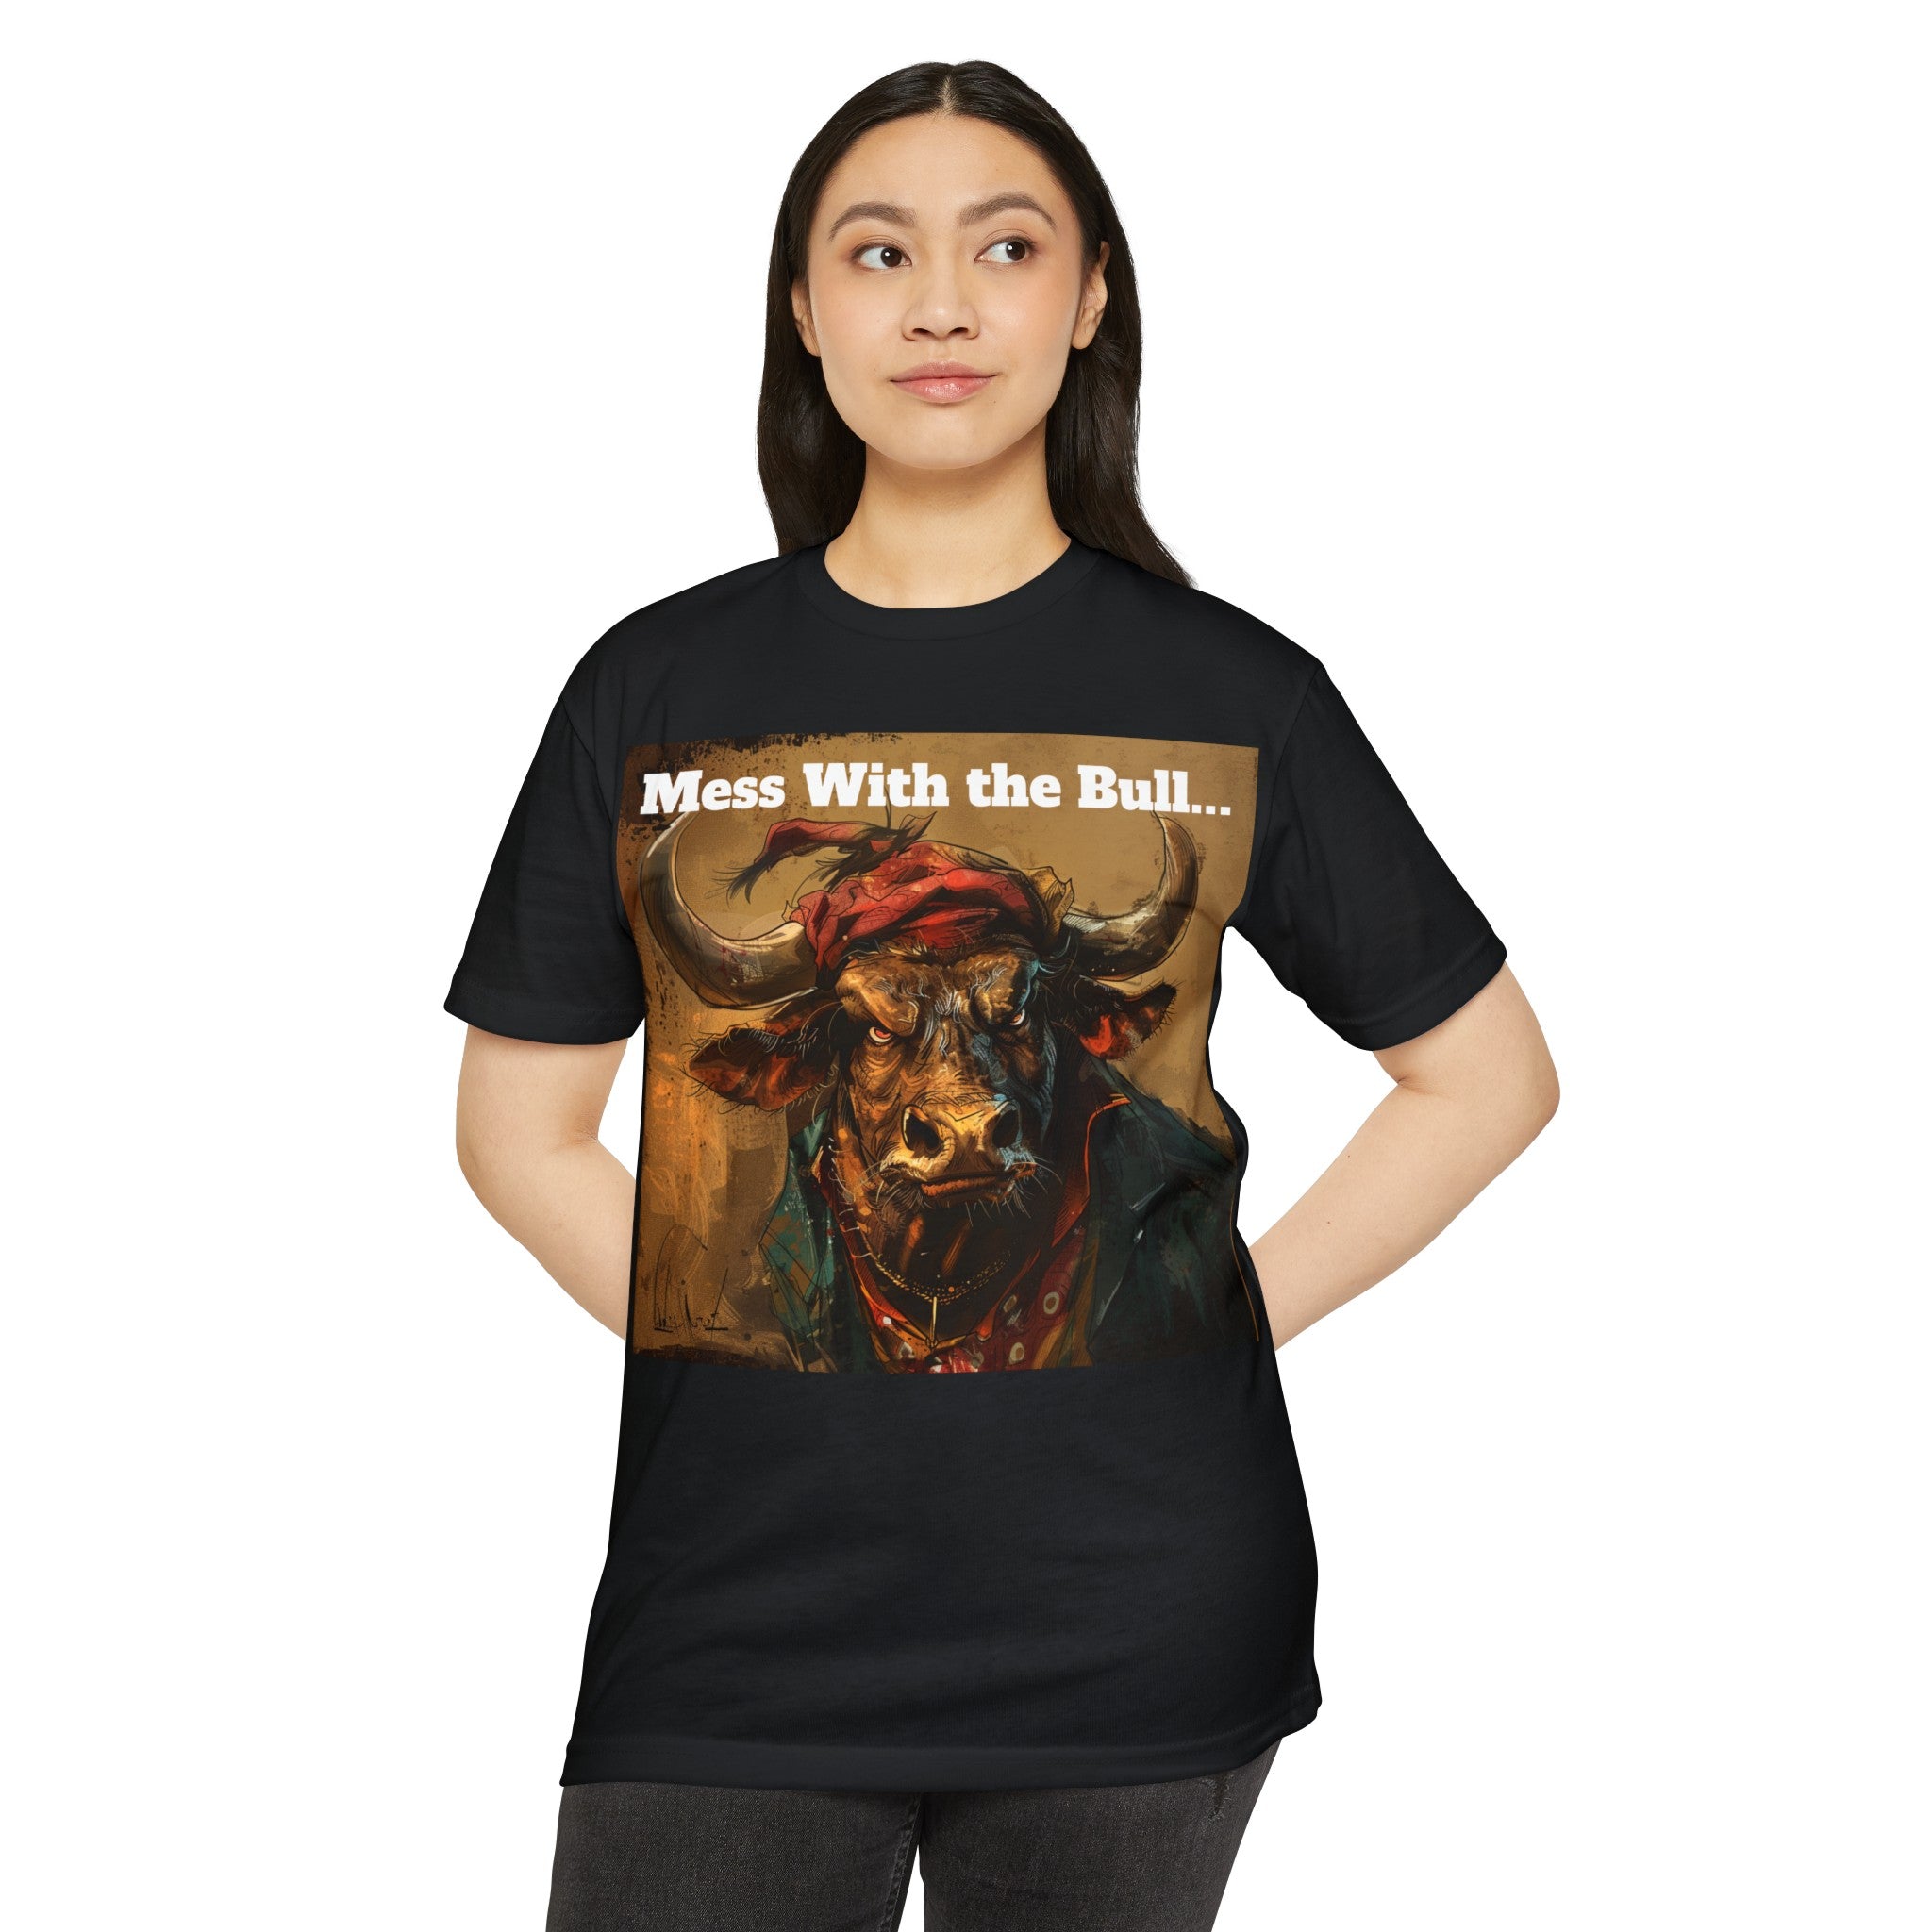 The image features a robust and detailed bull illustration on a unisex CVC jersey t-shirt, showcasing the muscular build and intense gaze of the bull, perfectly reflecting the shirt's "Mess with the Bull" theme. The fabric's quality is evident, promising both style and durability, while the design appeals to those who appreciate a blend of artistry and attitude in their fashion choices.